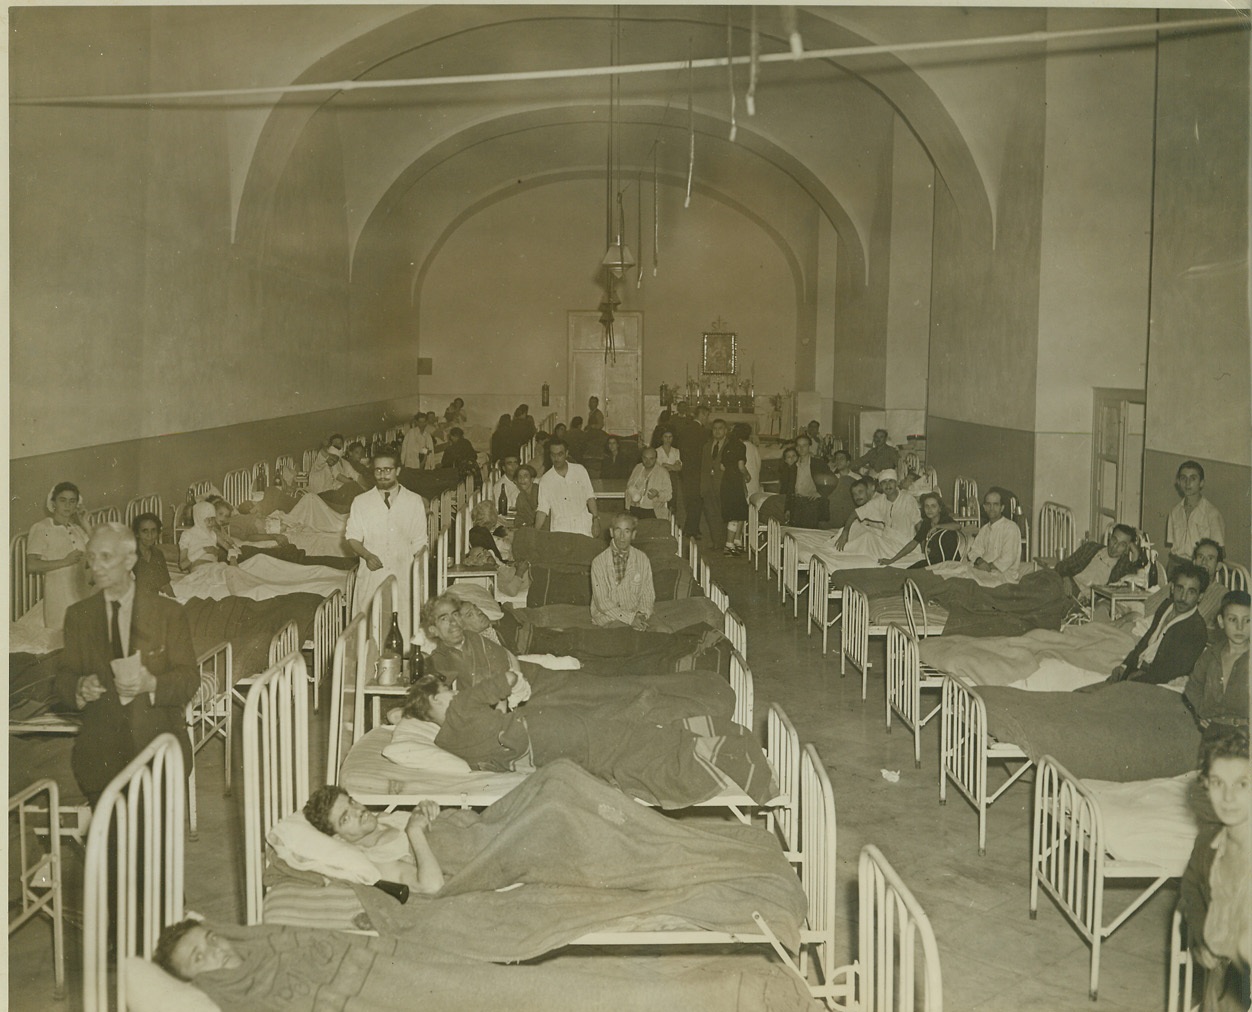 Civilians Who Fought Against Nazis, 10/9/1943. NAPLES, ITALY -- Wounded civilians crowd a ward at the Incurabilli Hospital, Naples, after the seven days civil war against the Nazis in that city. This one hospital held approximately 200 dead and 600 wounded following the bloody street war fare.  Credit: (ACME Photo by Charles Seawood, War Pool Correspondent);